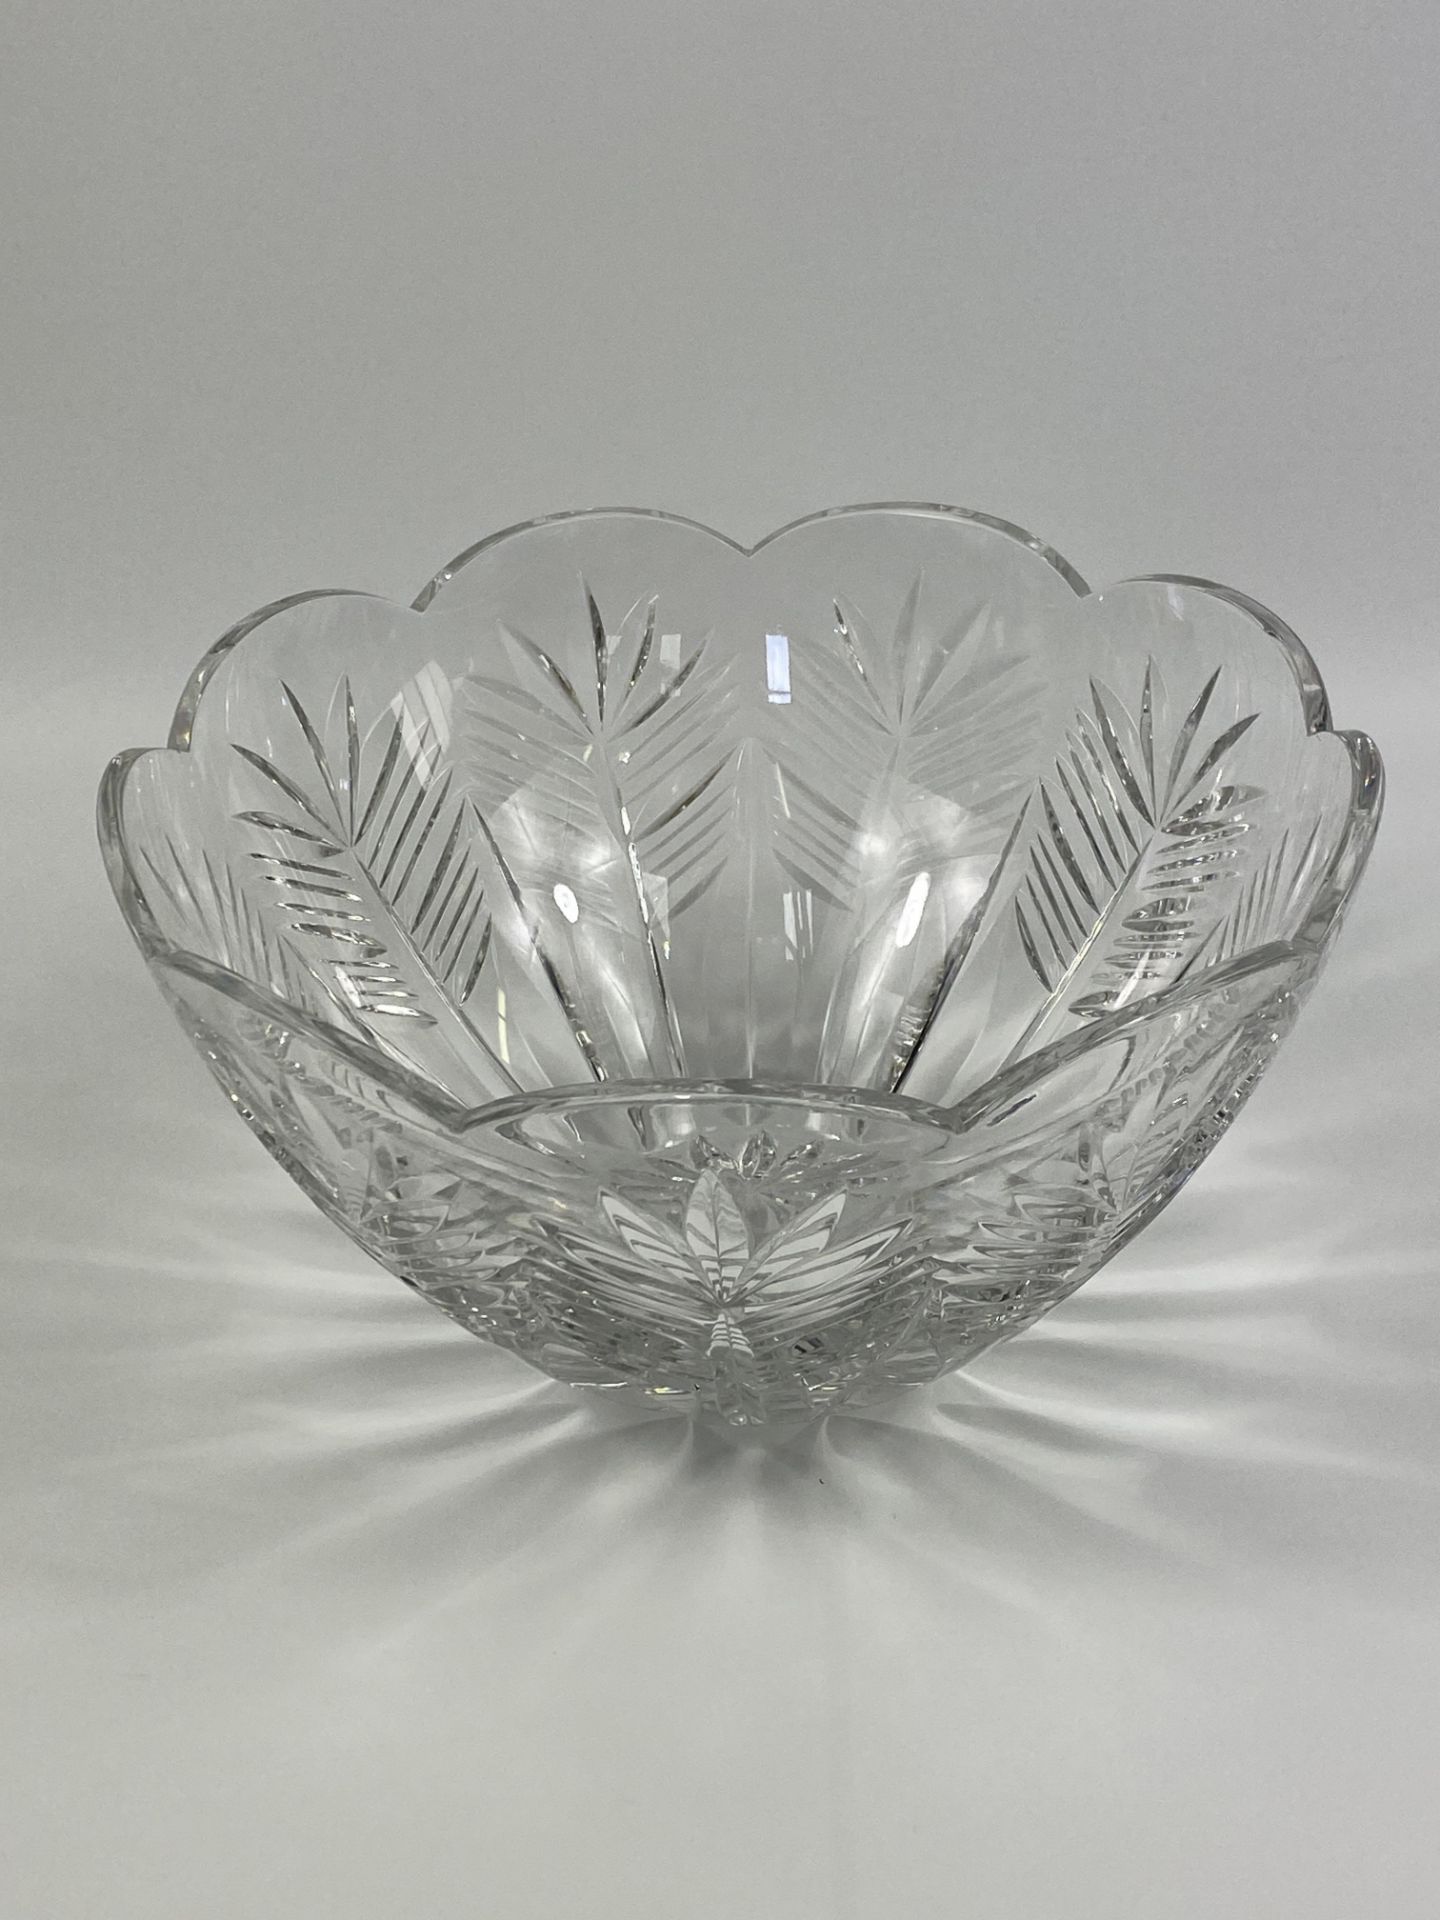 Waterford crystal glass bowl - Image 6 of 6